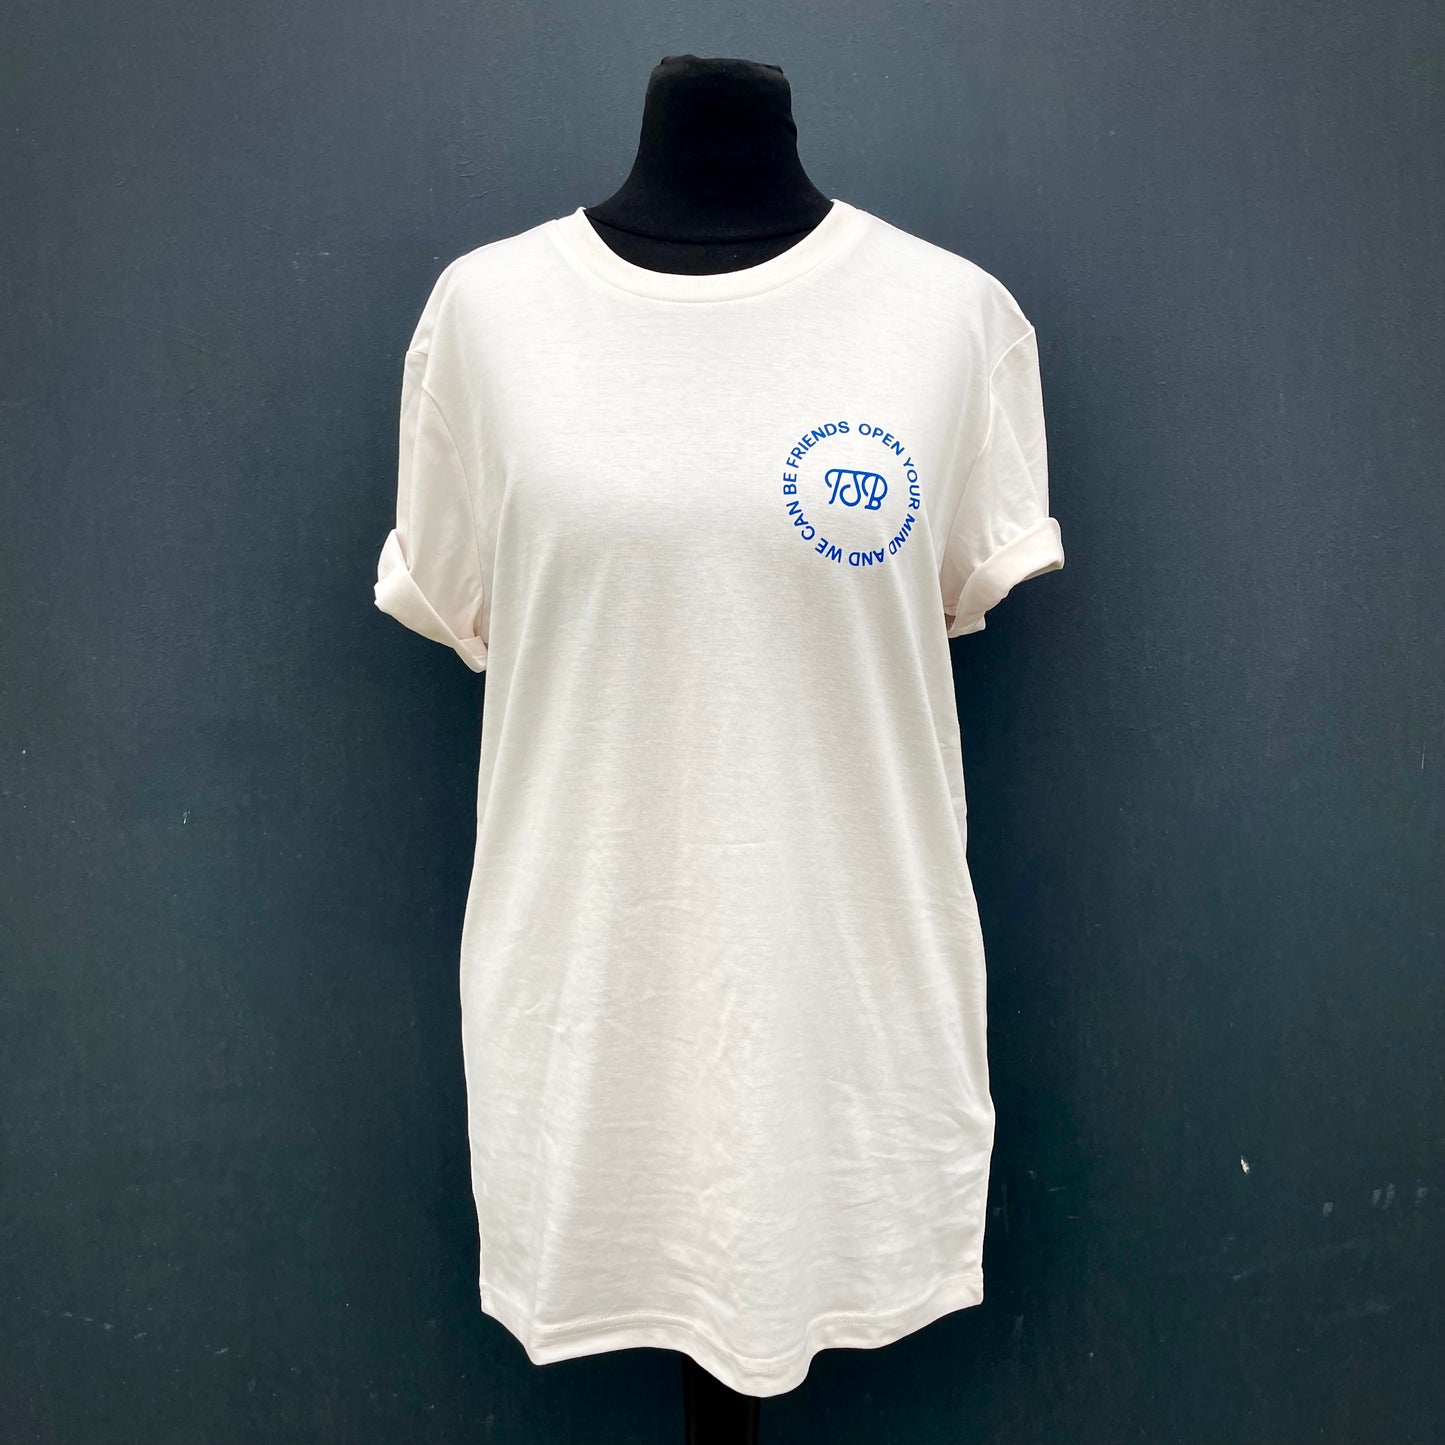 "Open Your Mind And We Can Be Friends" T-Shirt (Vintage White)